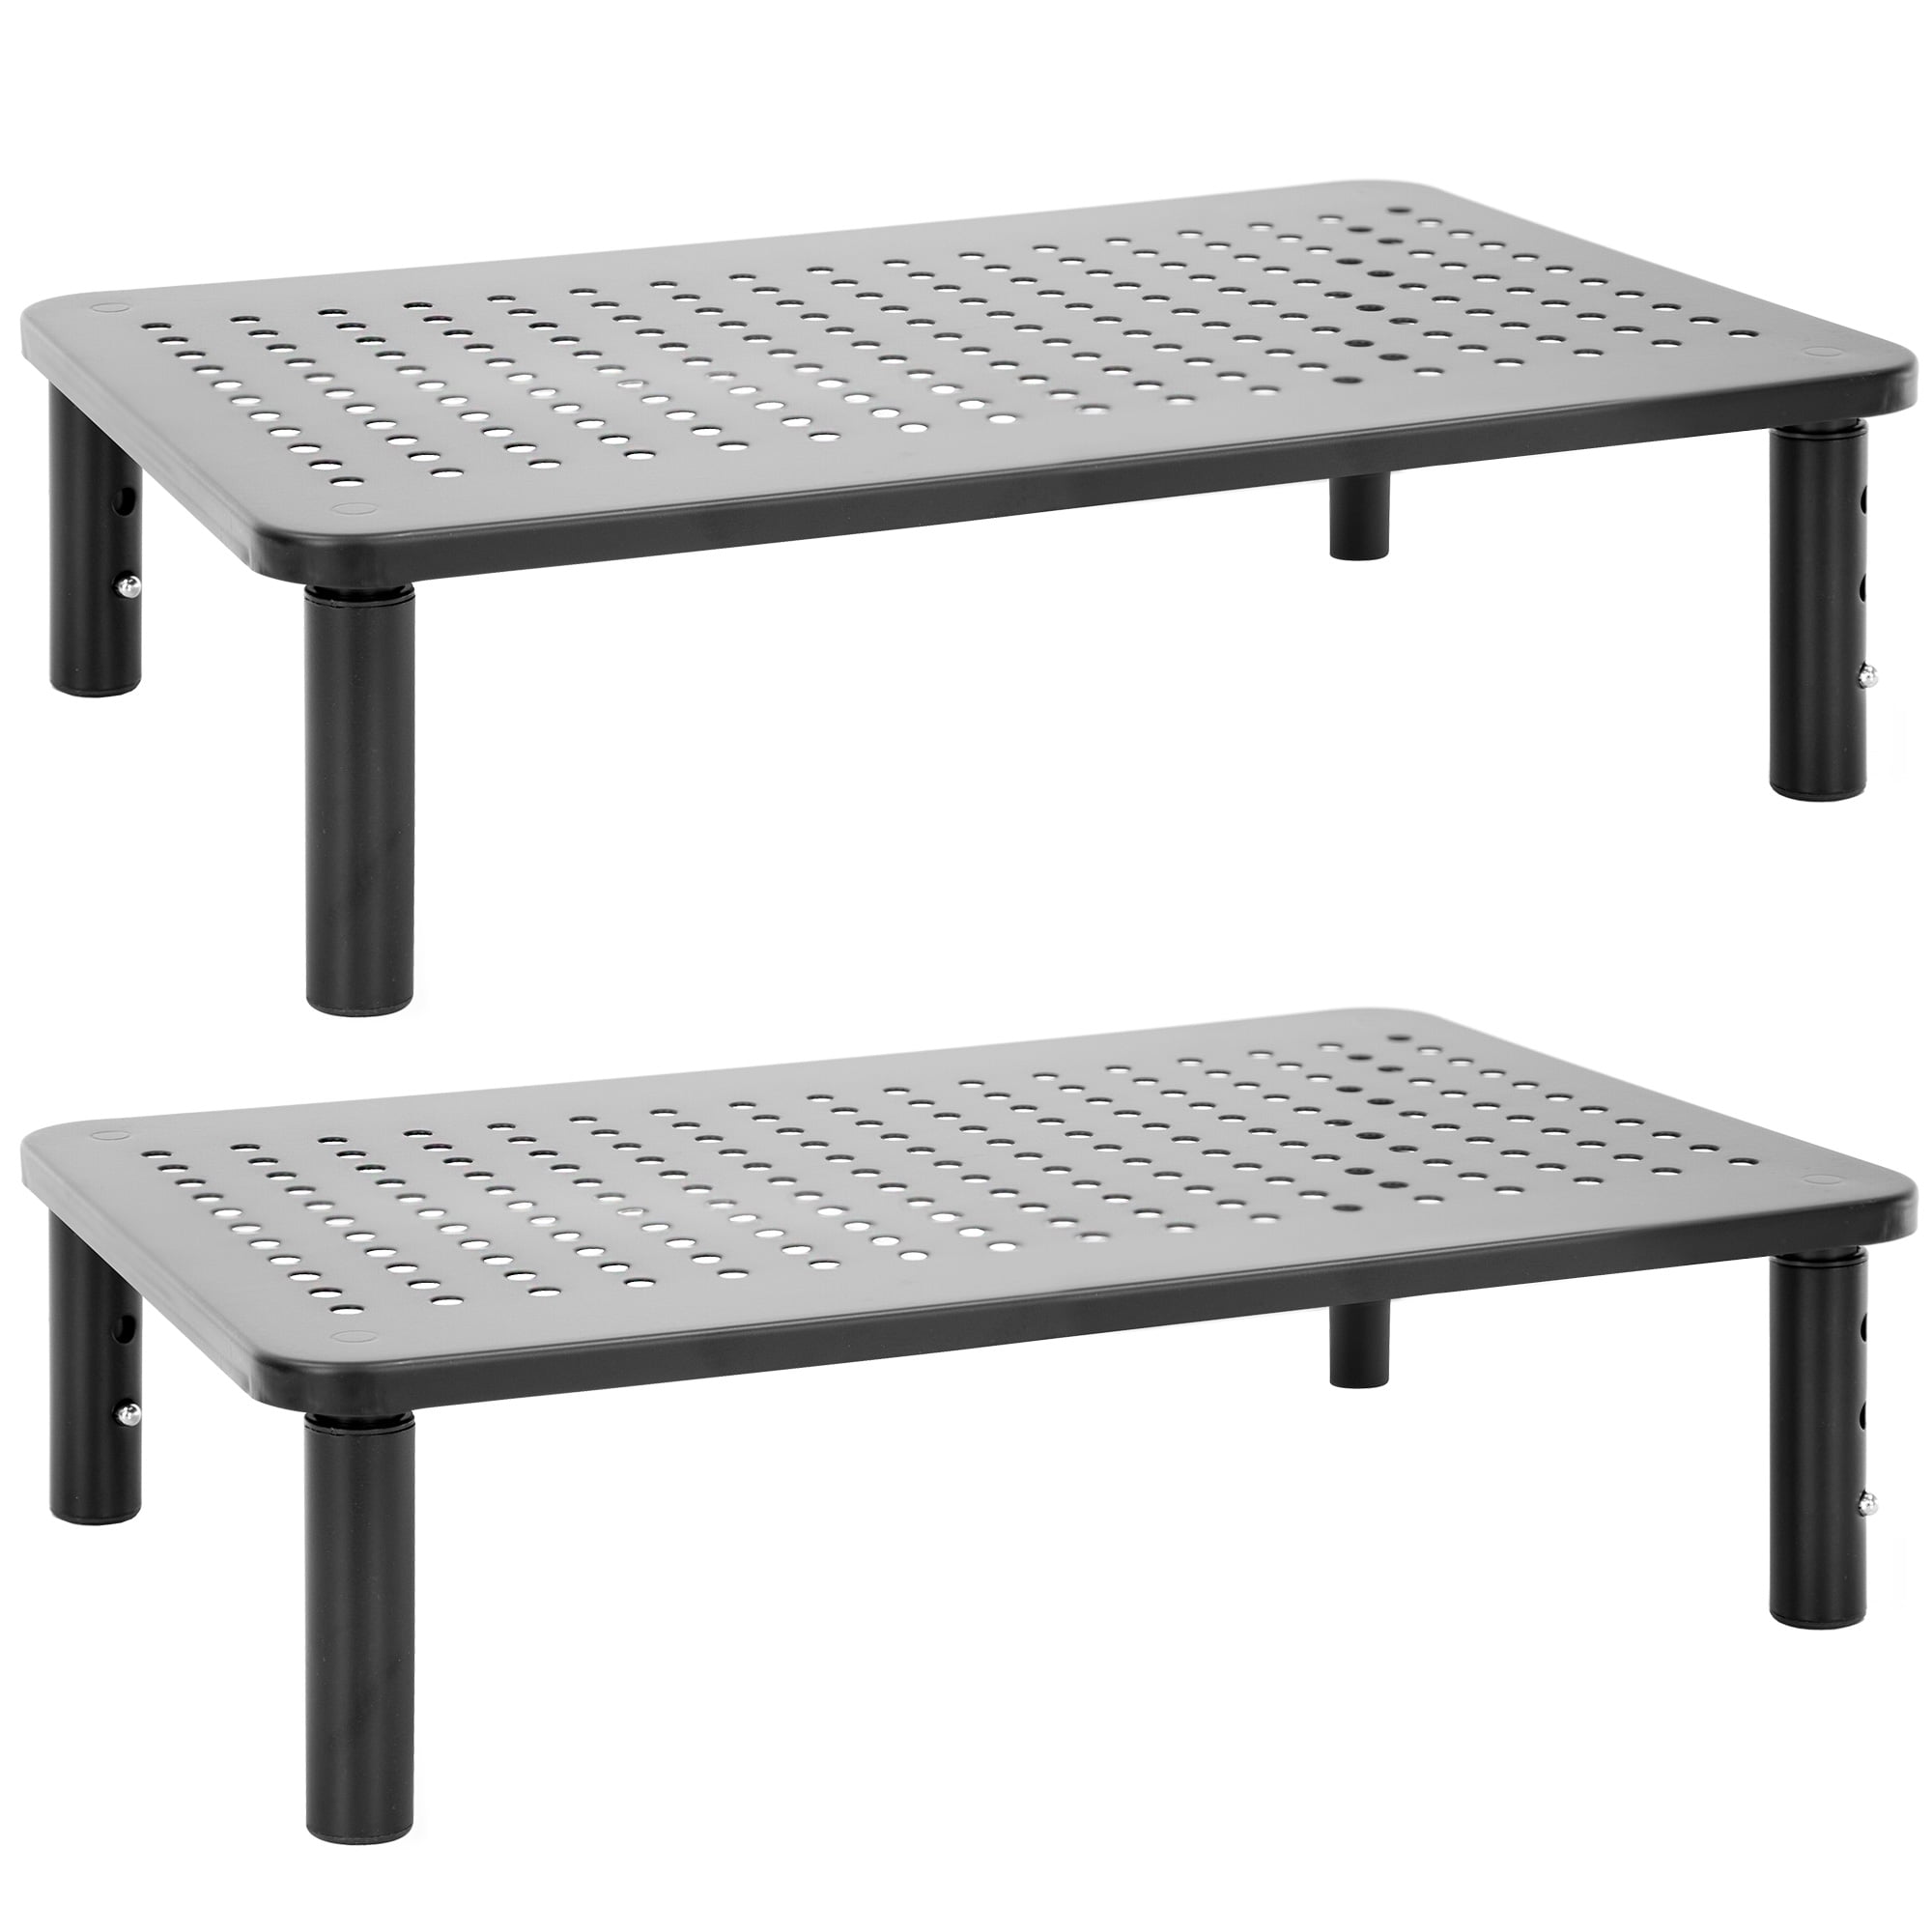 Halter LZ-501 Monitor Stand Riser w/Tray